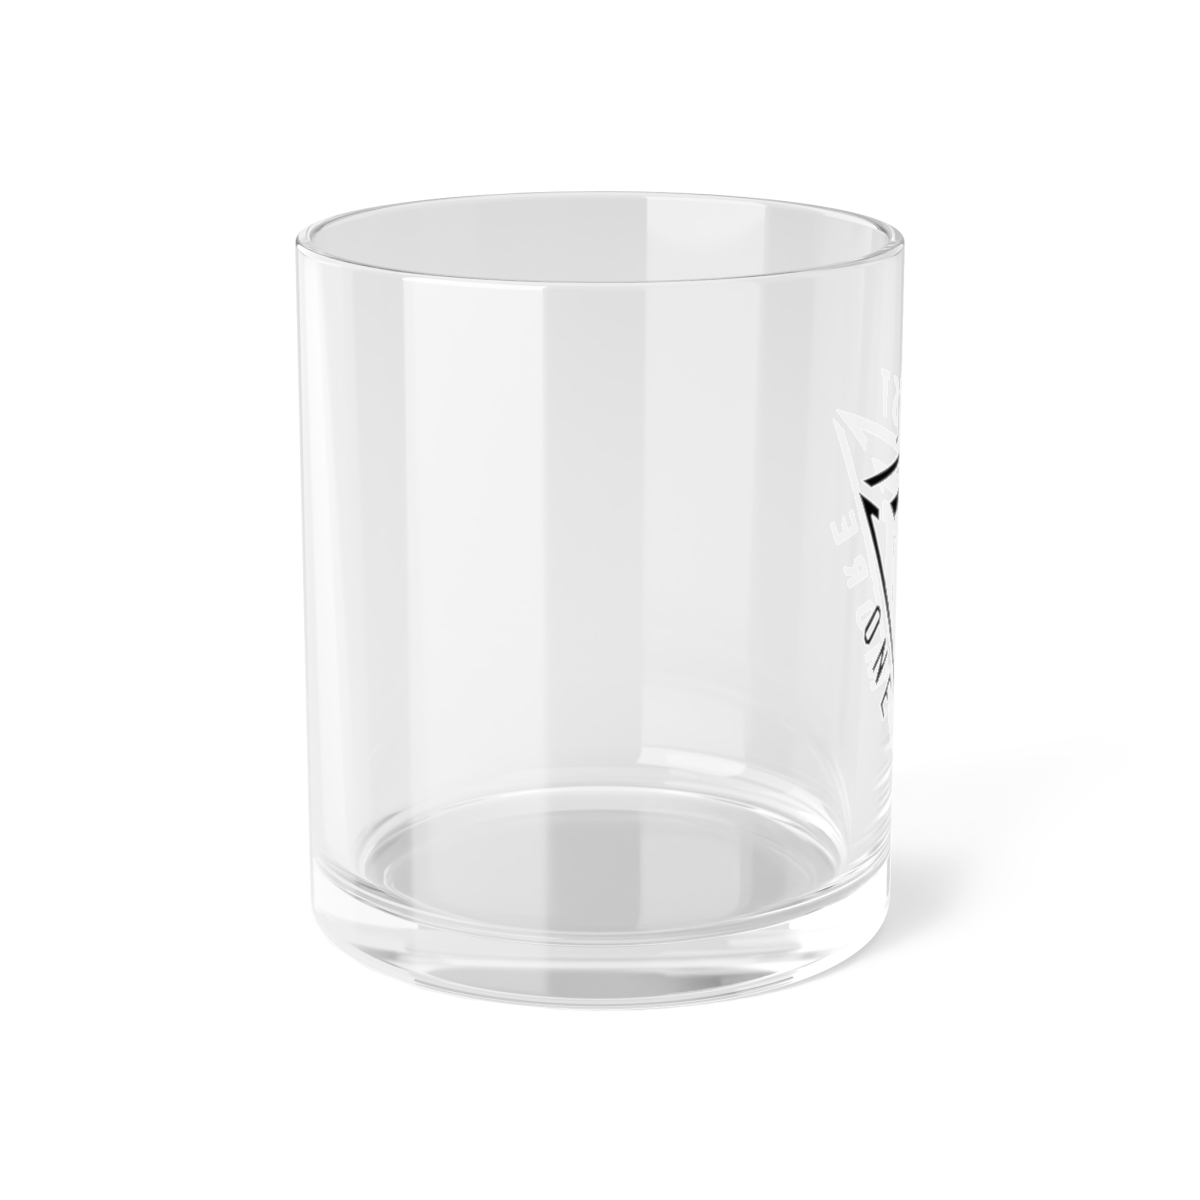 Whiskey Glass "Just One More" product thumbnail image